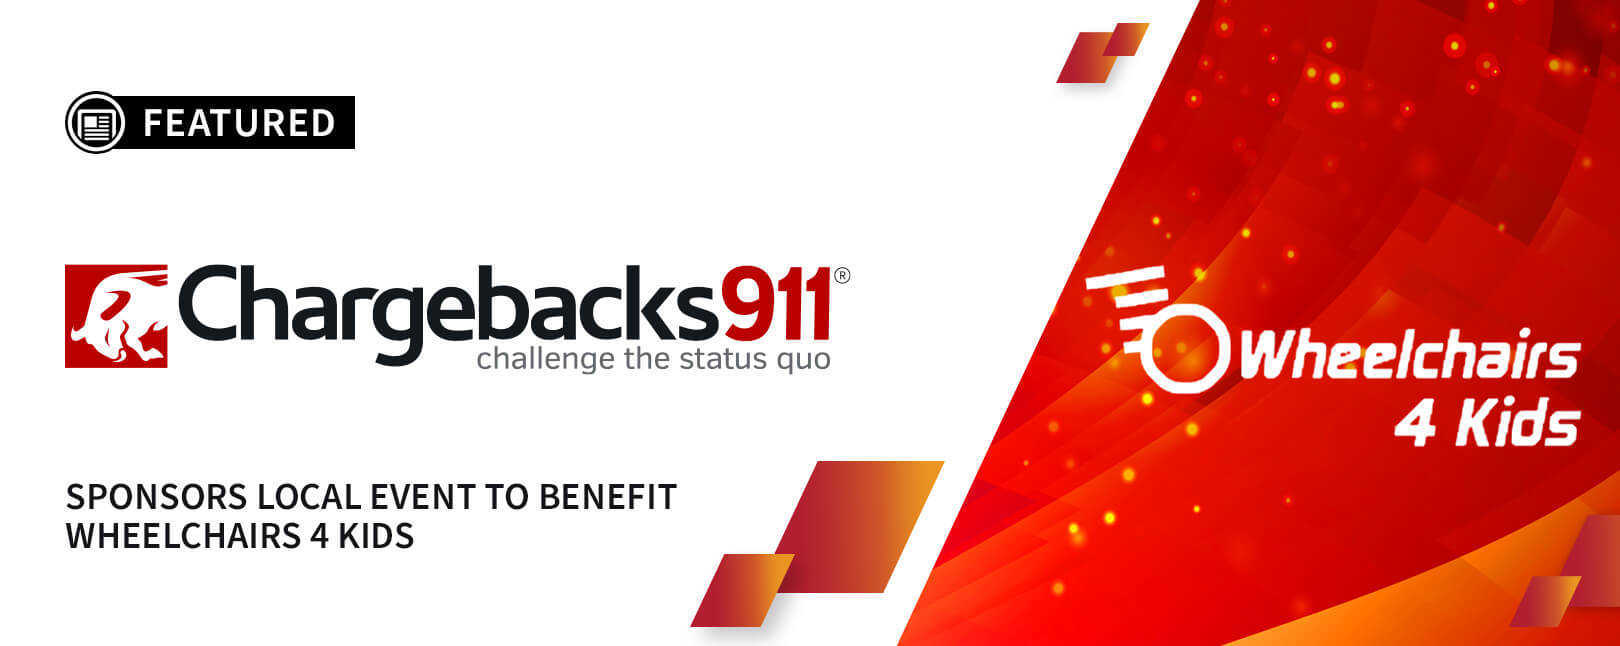 Chargebacks911® Sponsors Local Event to Benefit Wheelchairs 4 Kids